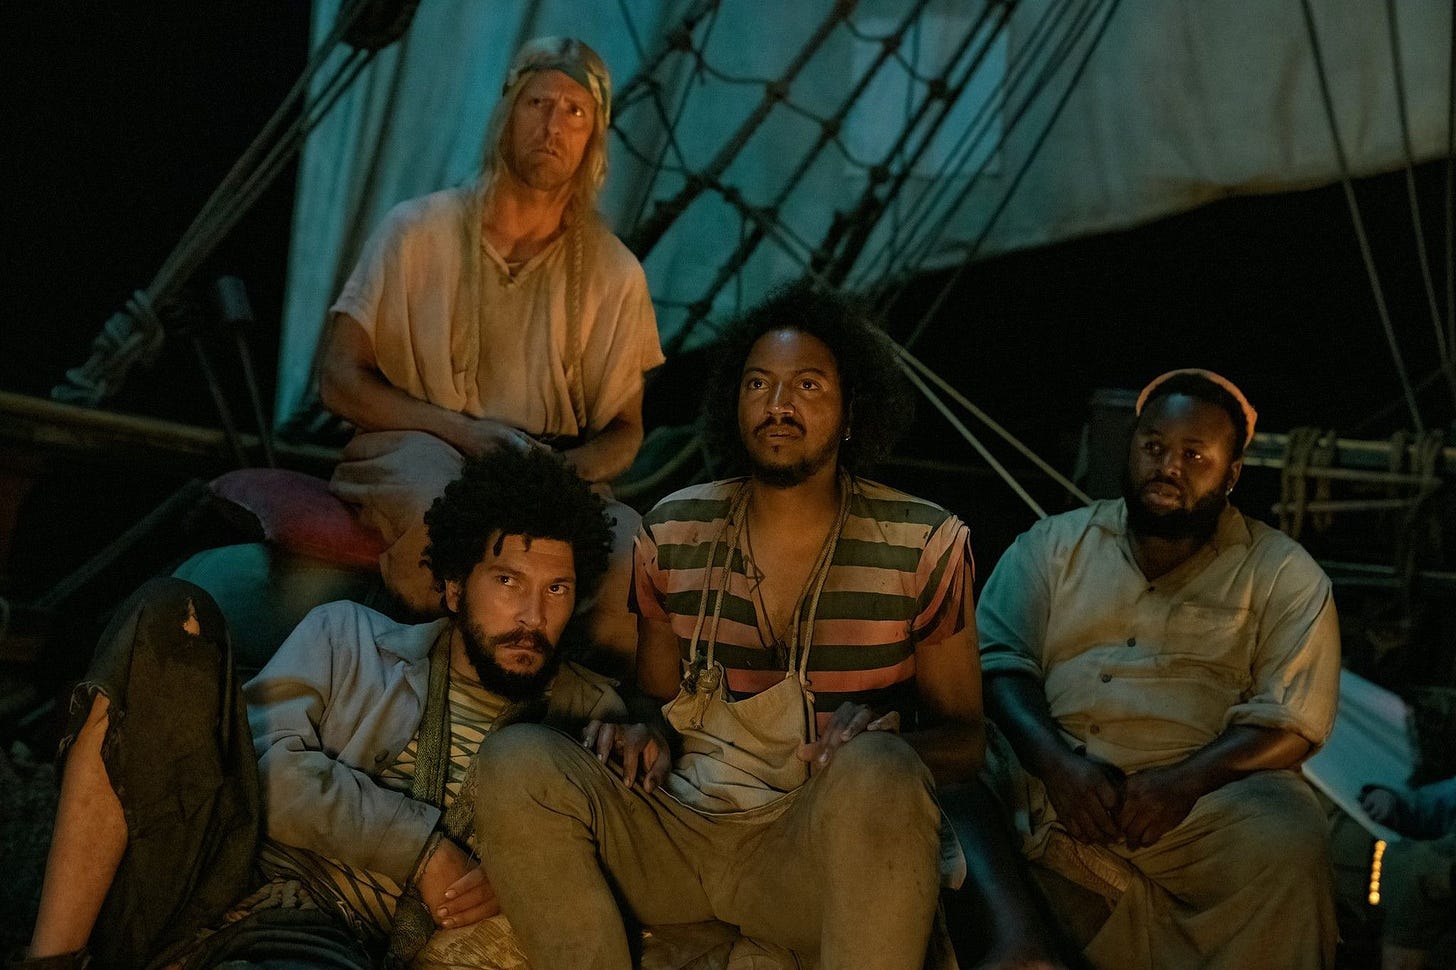 four pirates, a tall white man with blond shoulder length hair, a black man with curly hair and a beard, a black man and with messy curly hair and a beard wearing an apron and a striped shirt and a black man with a beard, an earring and an orange beanie all look with confusion at something off-screen